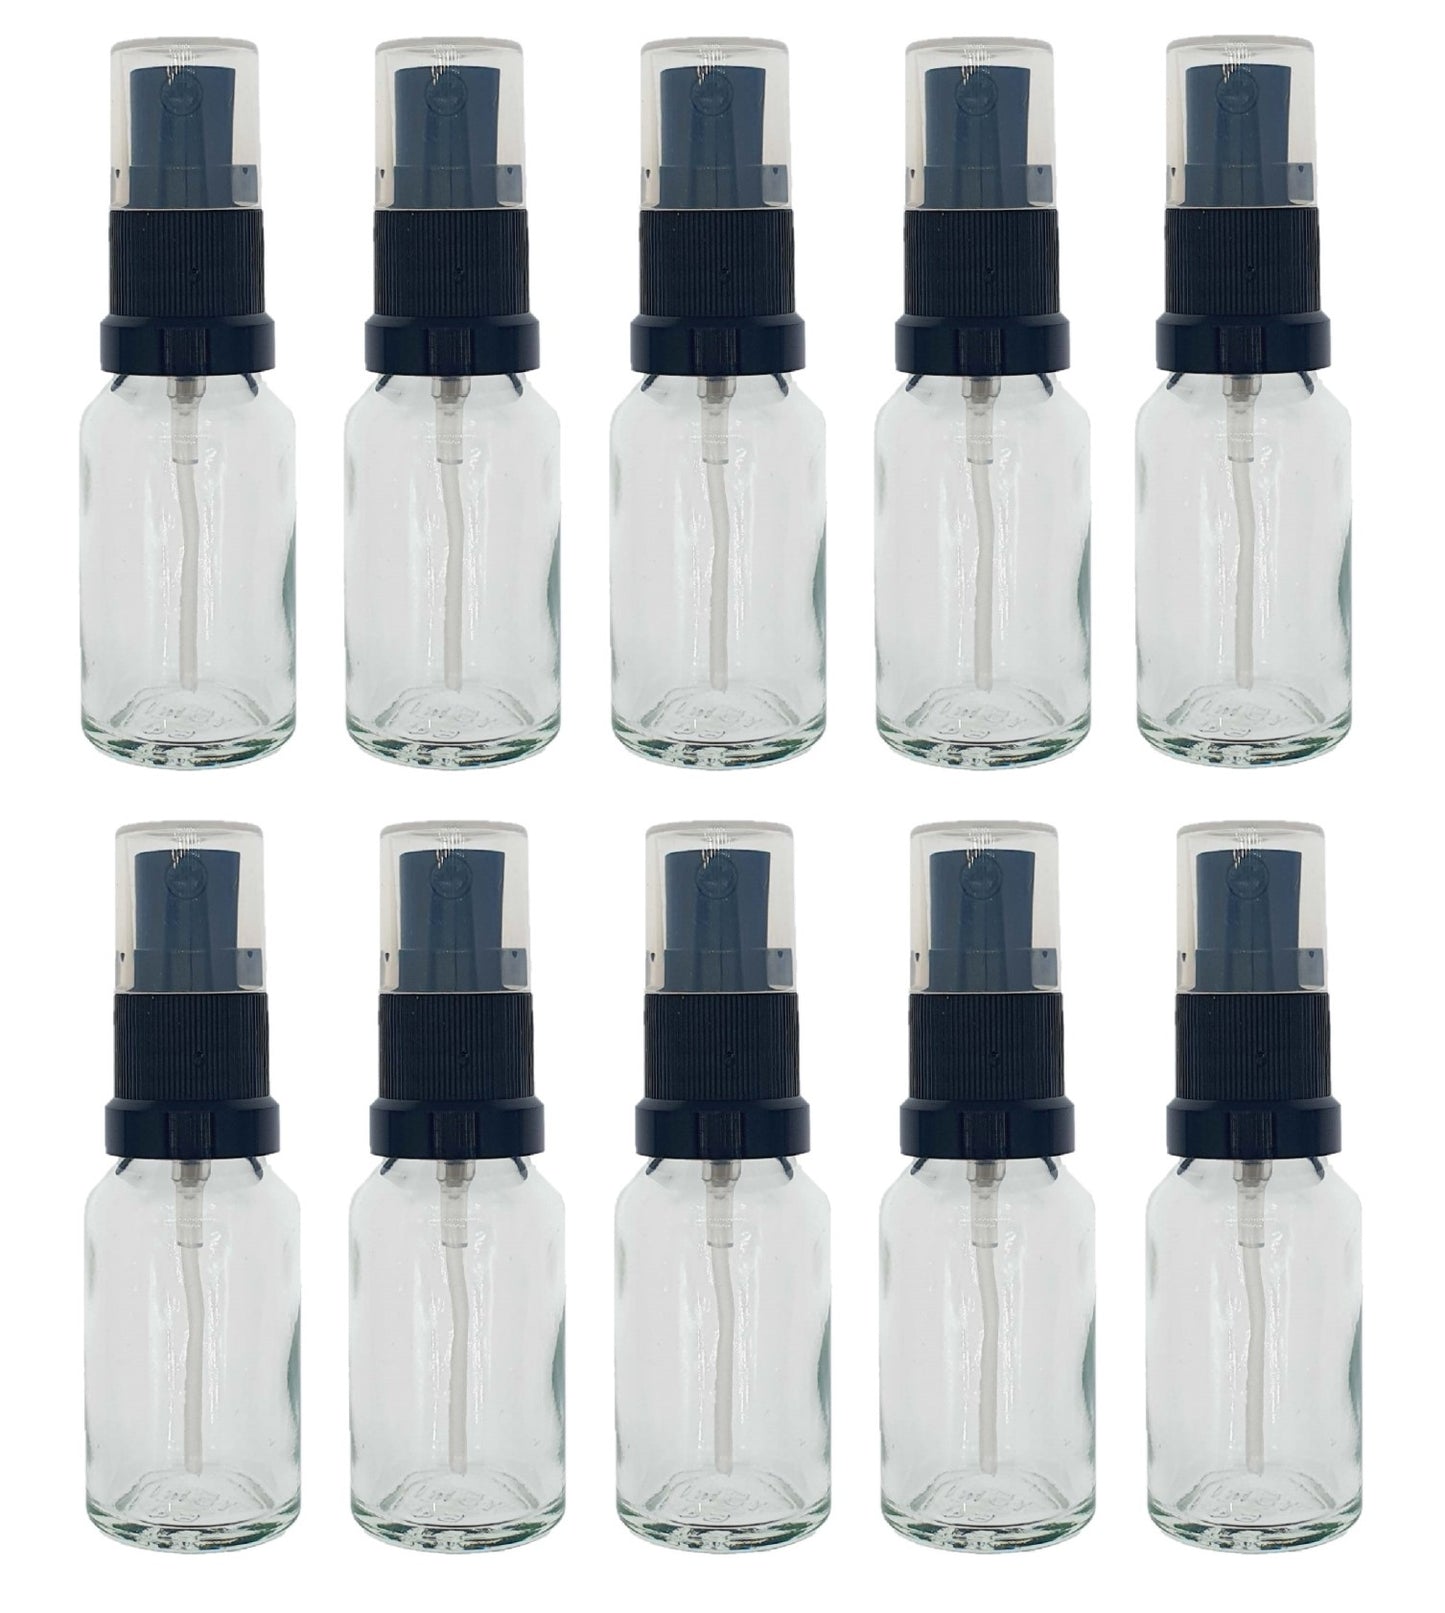 15ml Clear Glass Bottles with Black Atomiser Spray and Clear Overcap